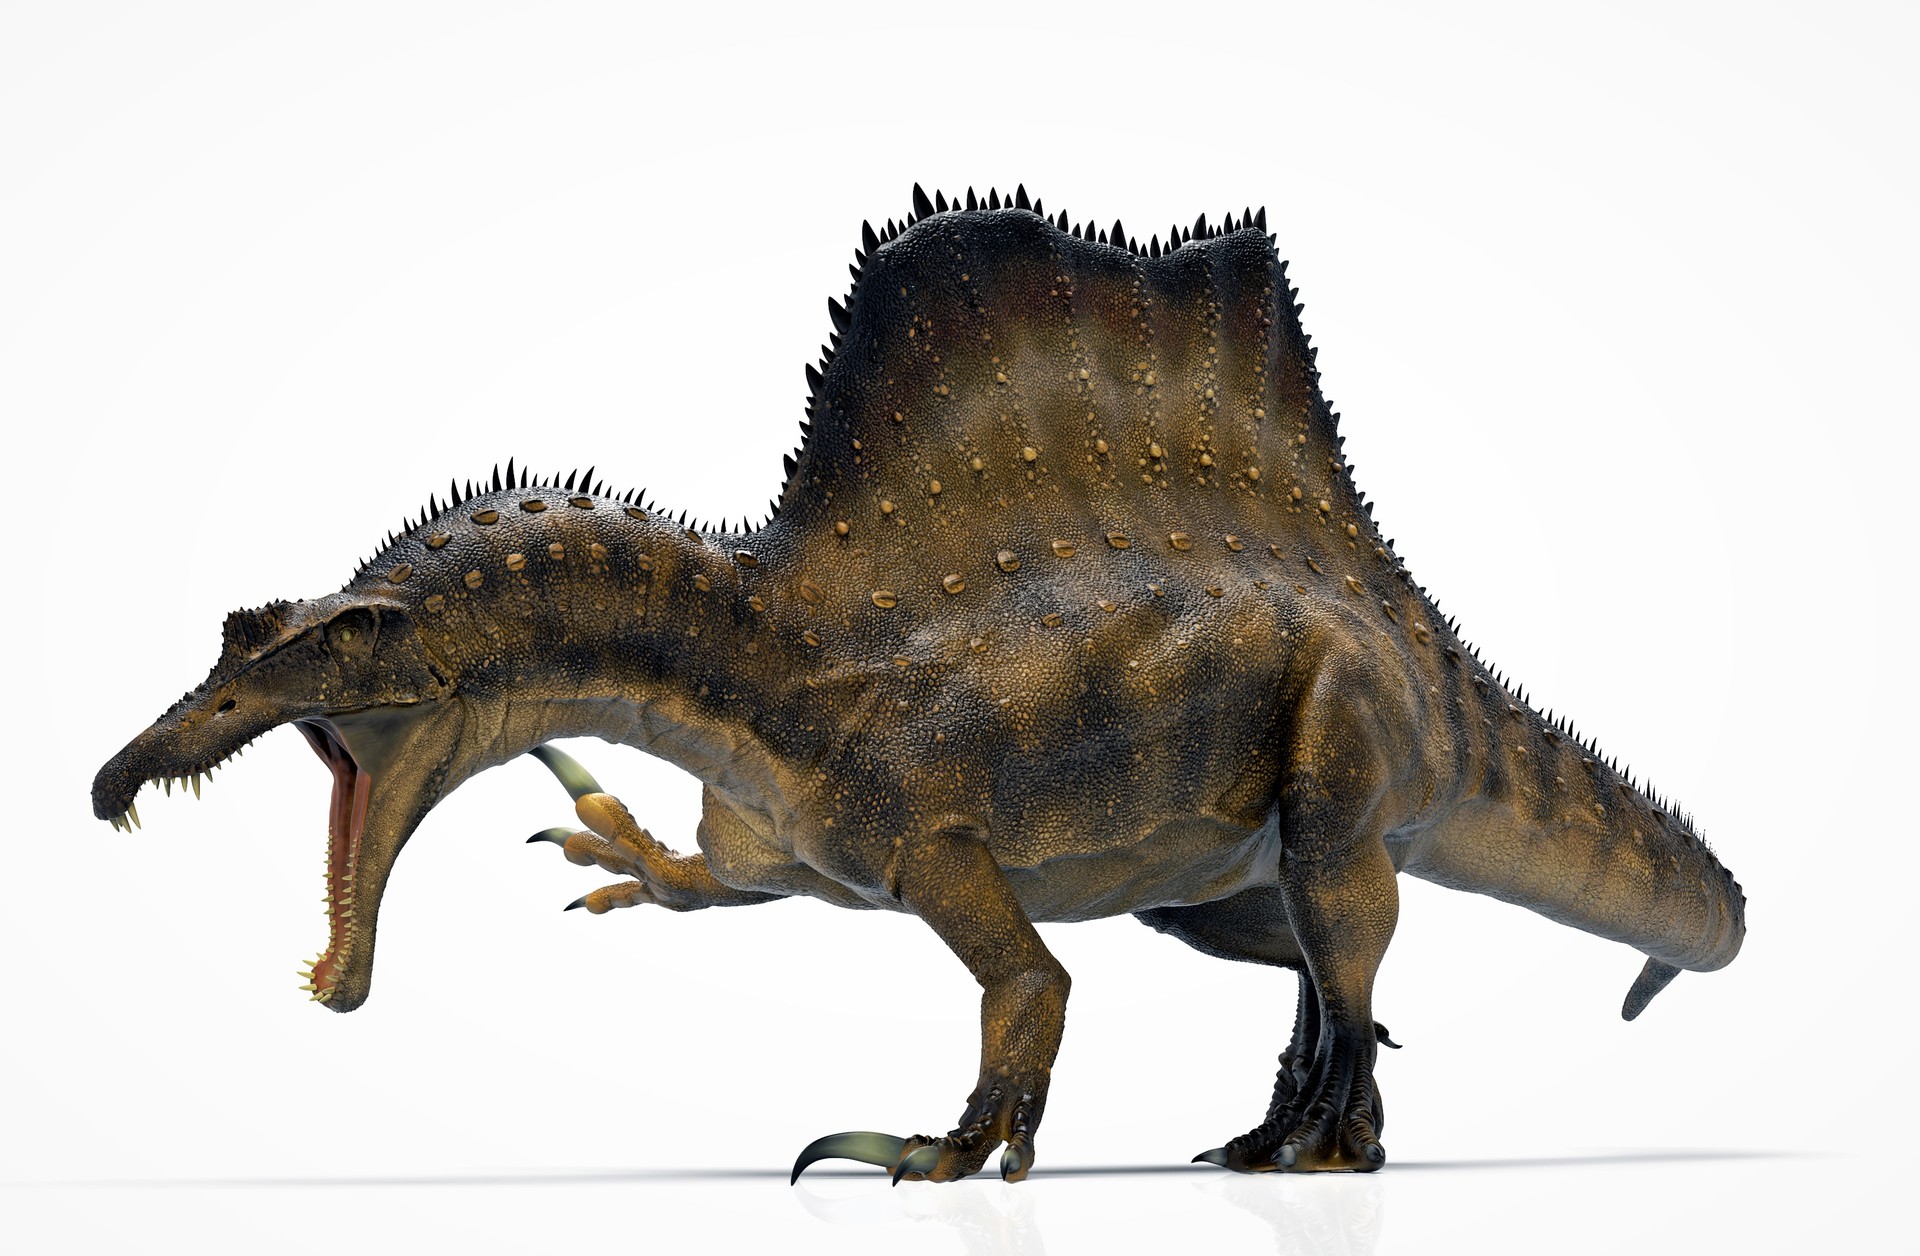 Spinosaurus prepares to use its huge claws to defend itself, possibly against Carcharodnotsaurus.